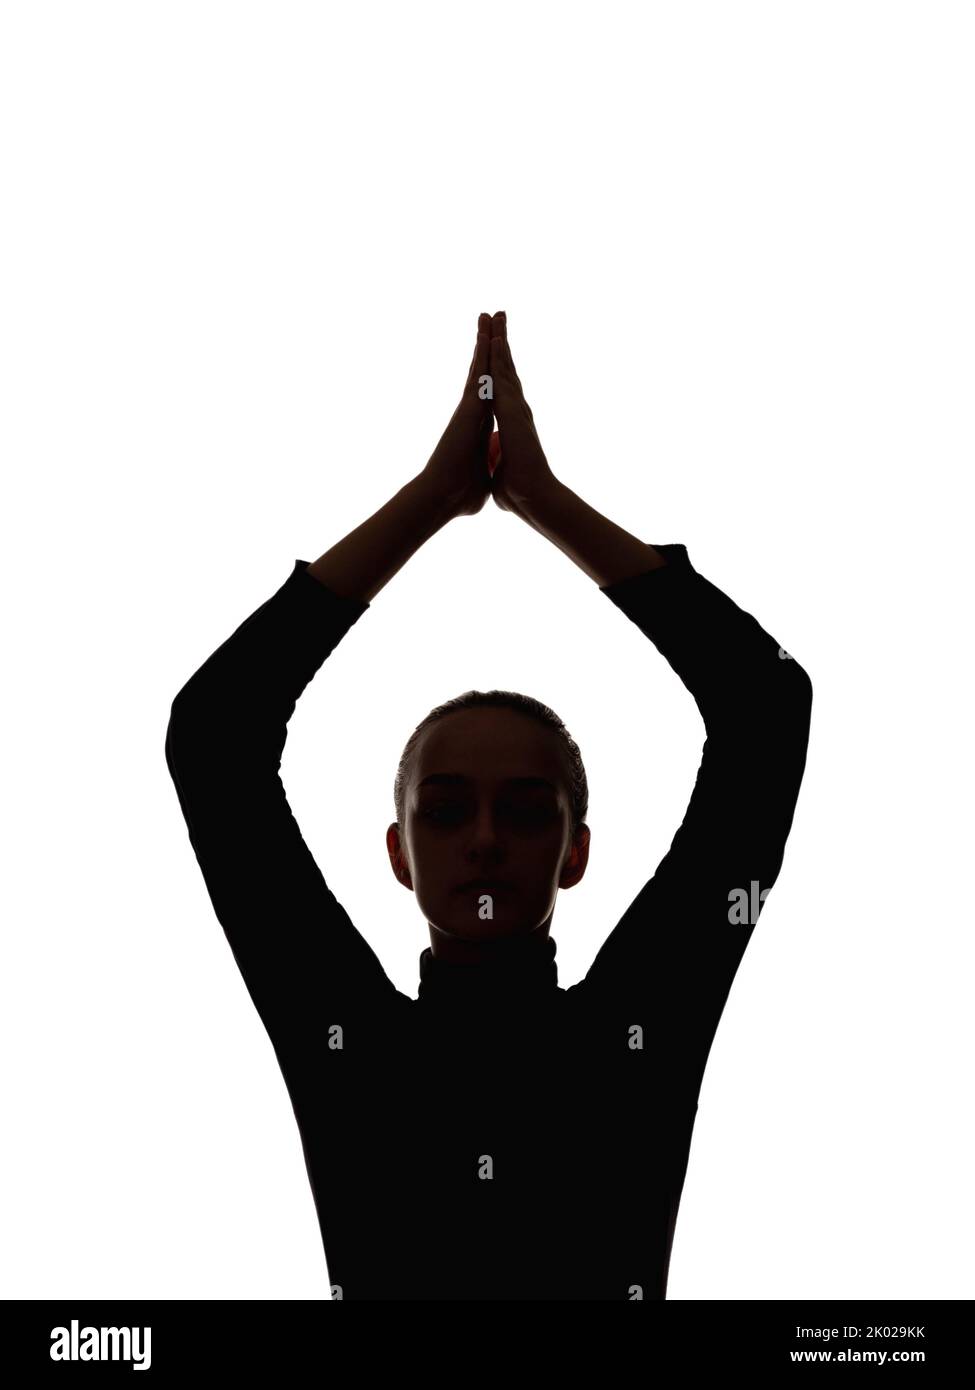 female silhouette yoga meditation relaxed woman Stock Photo